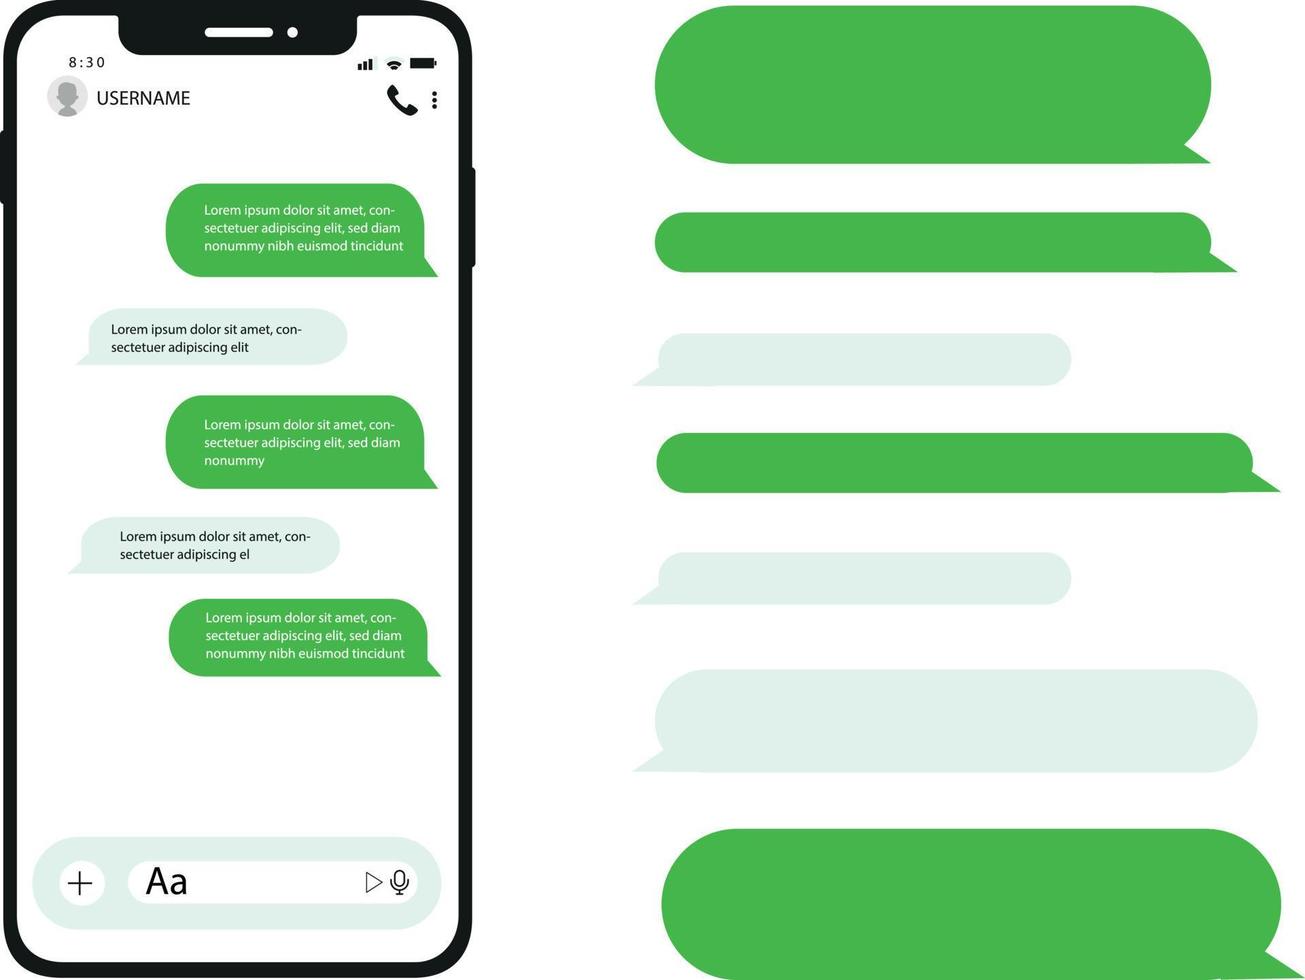 Smart phones chatting sms template bubbles. Chat templates, message, phone and speech bubbles blue colour in flat style. Social media design concept. Vector illustration